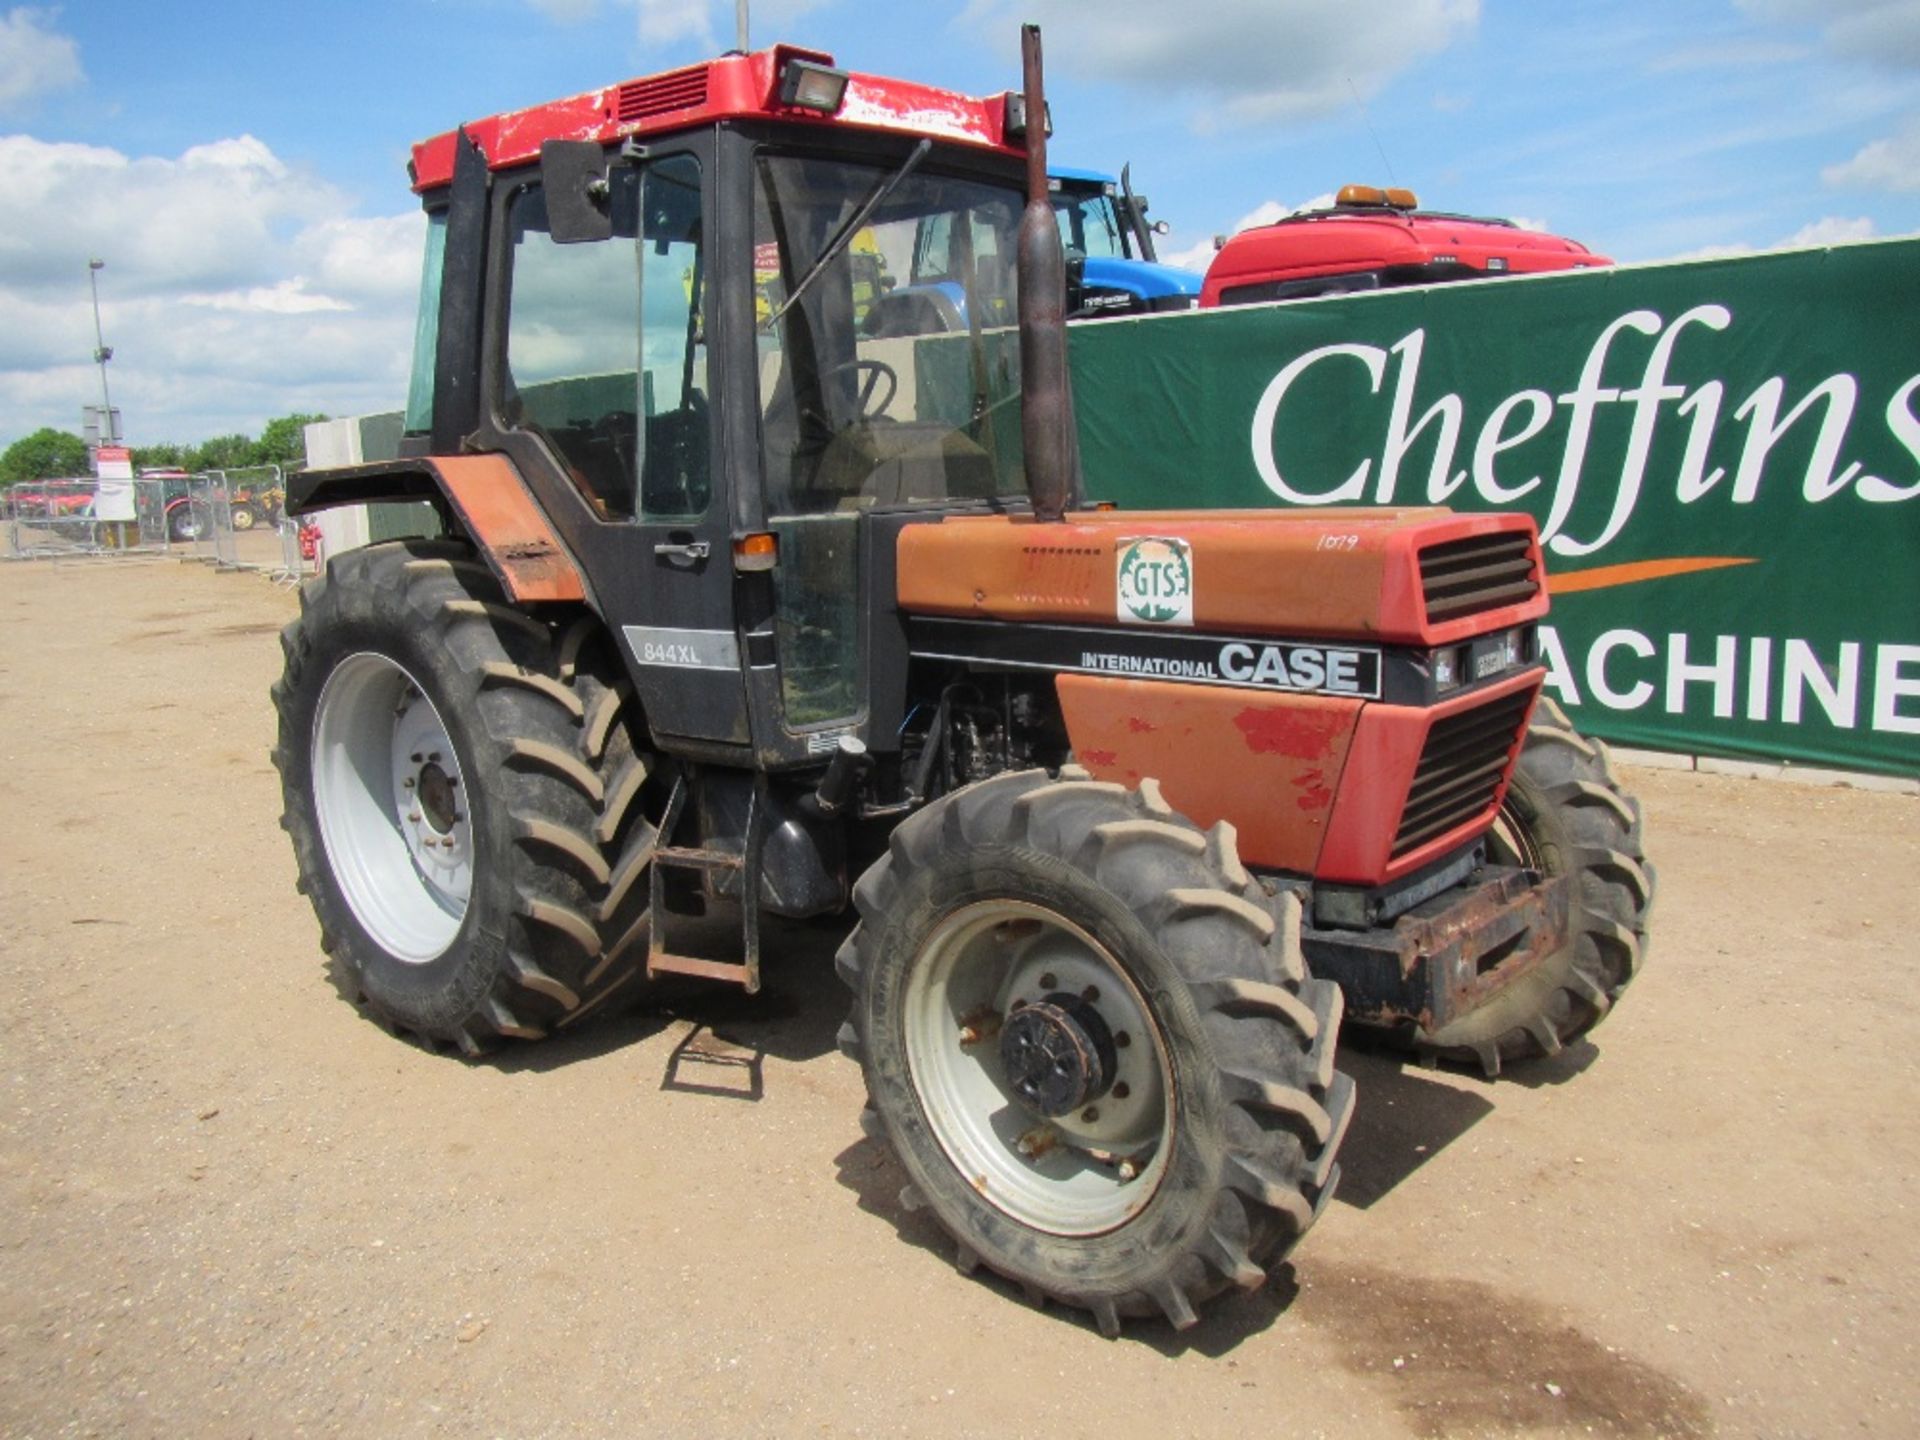 Case 844XL 4wd Tractor c/w V5 Reg. No. H734 BEG Hours: 7,275 - Image 3 of 17